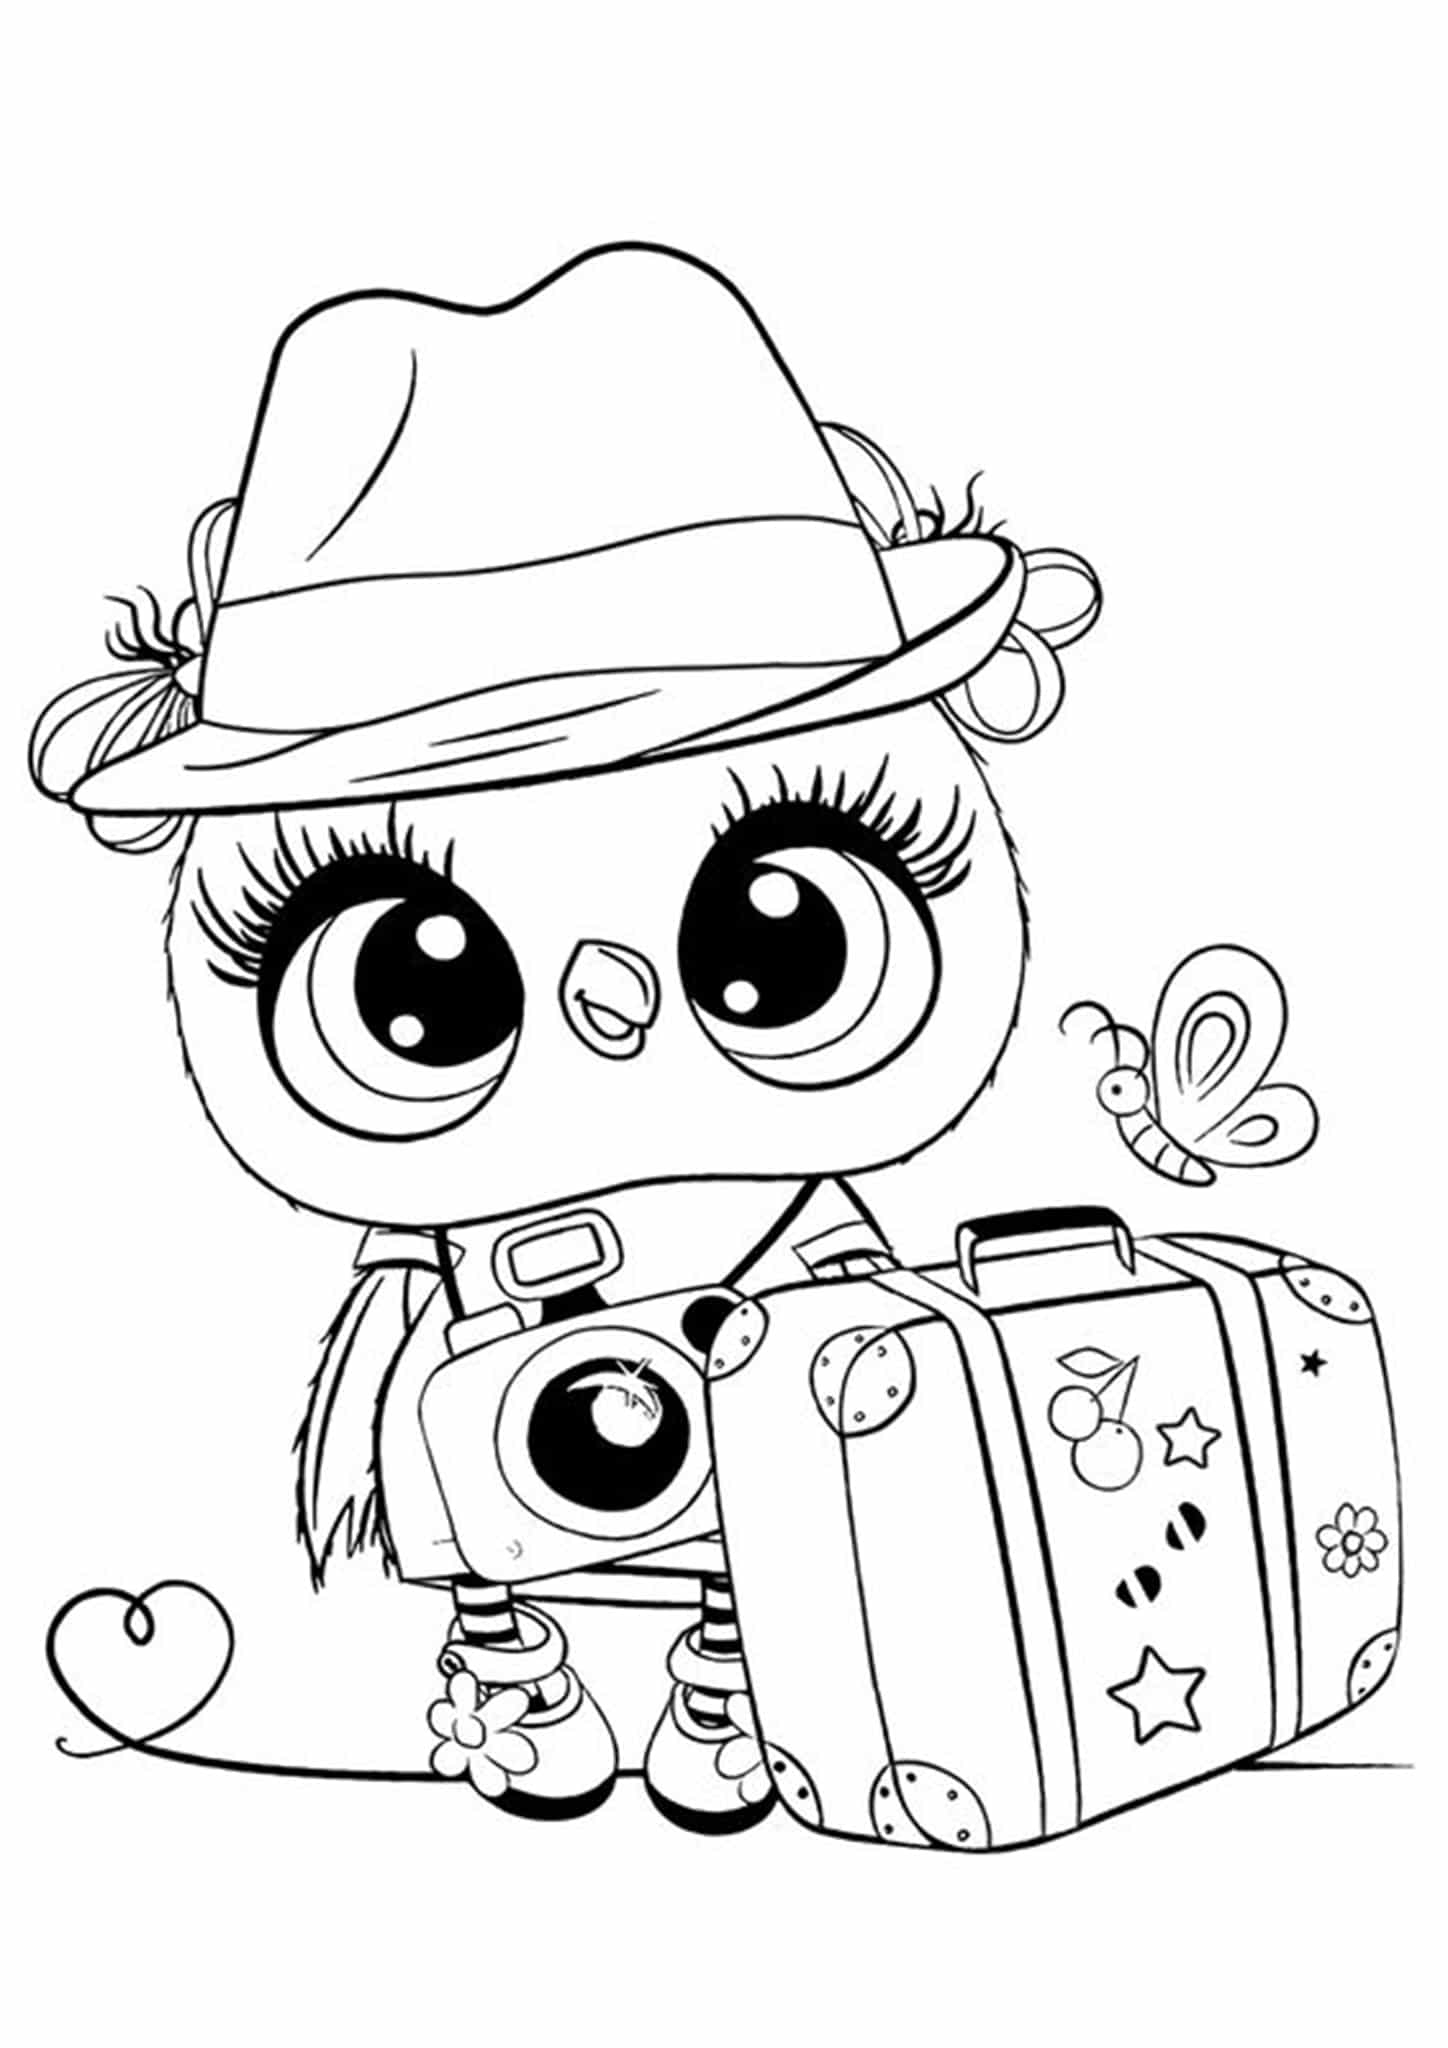 Download Free & Easy To Print Owl Coloring Pages - Tulamama